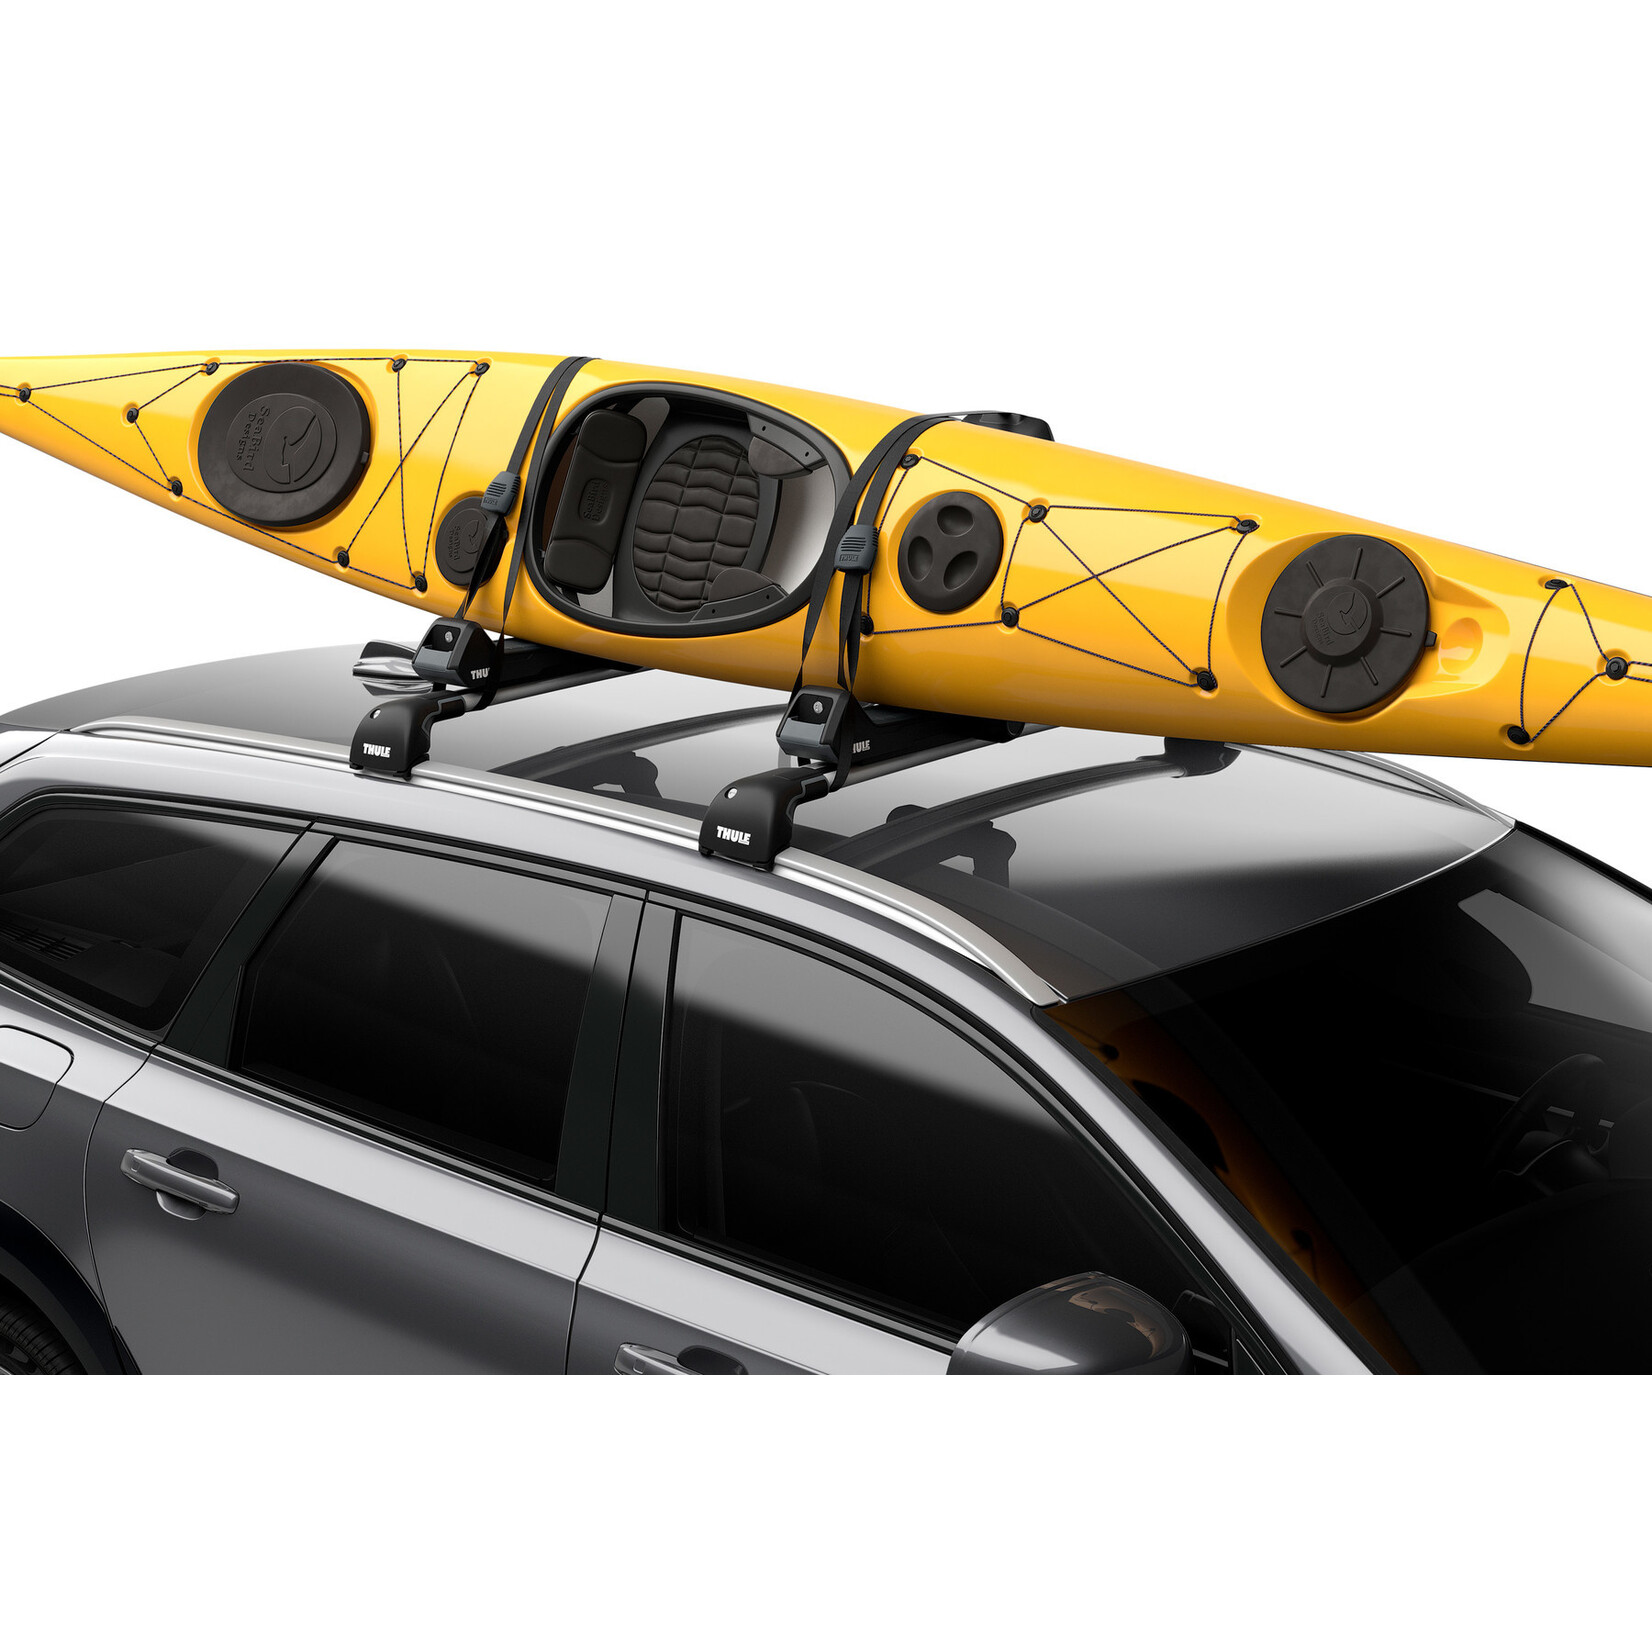 Thule - Compass- Kayak/Sup Carrier